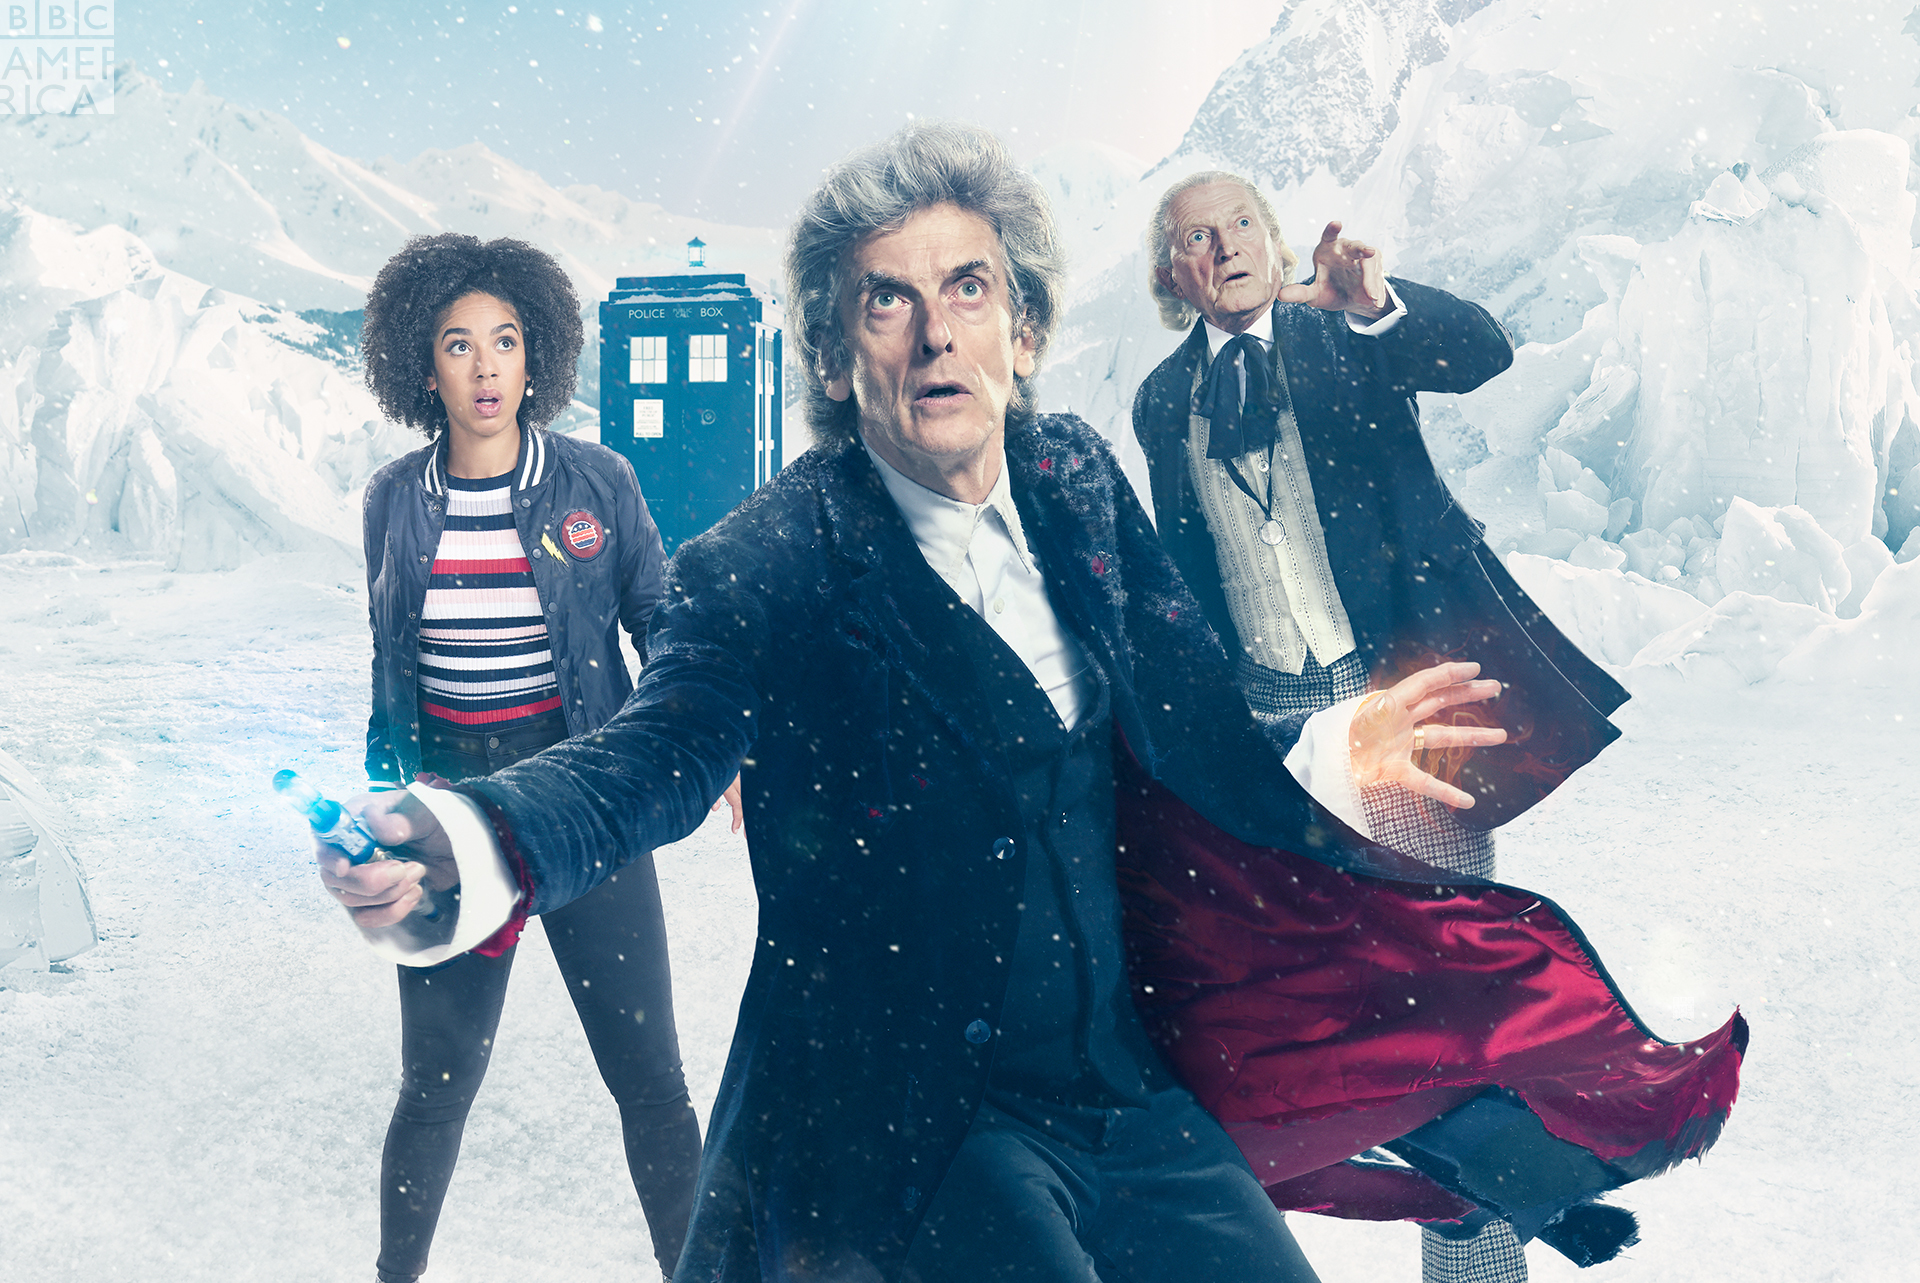 Recap: Doctor Who Christmas Special, “Twice Upon A Time”